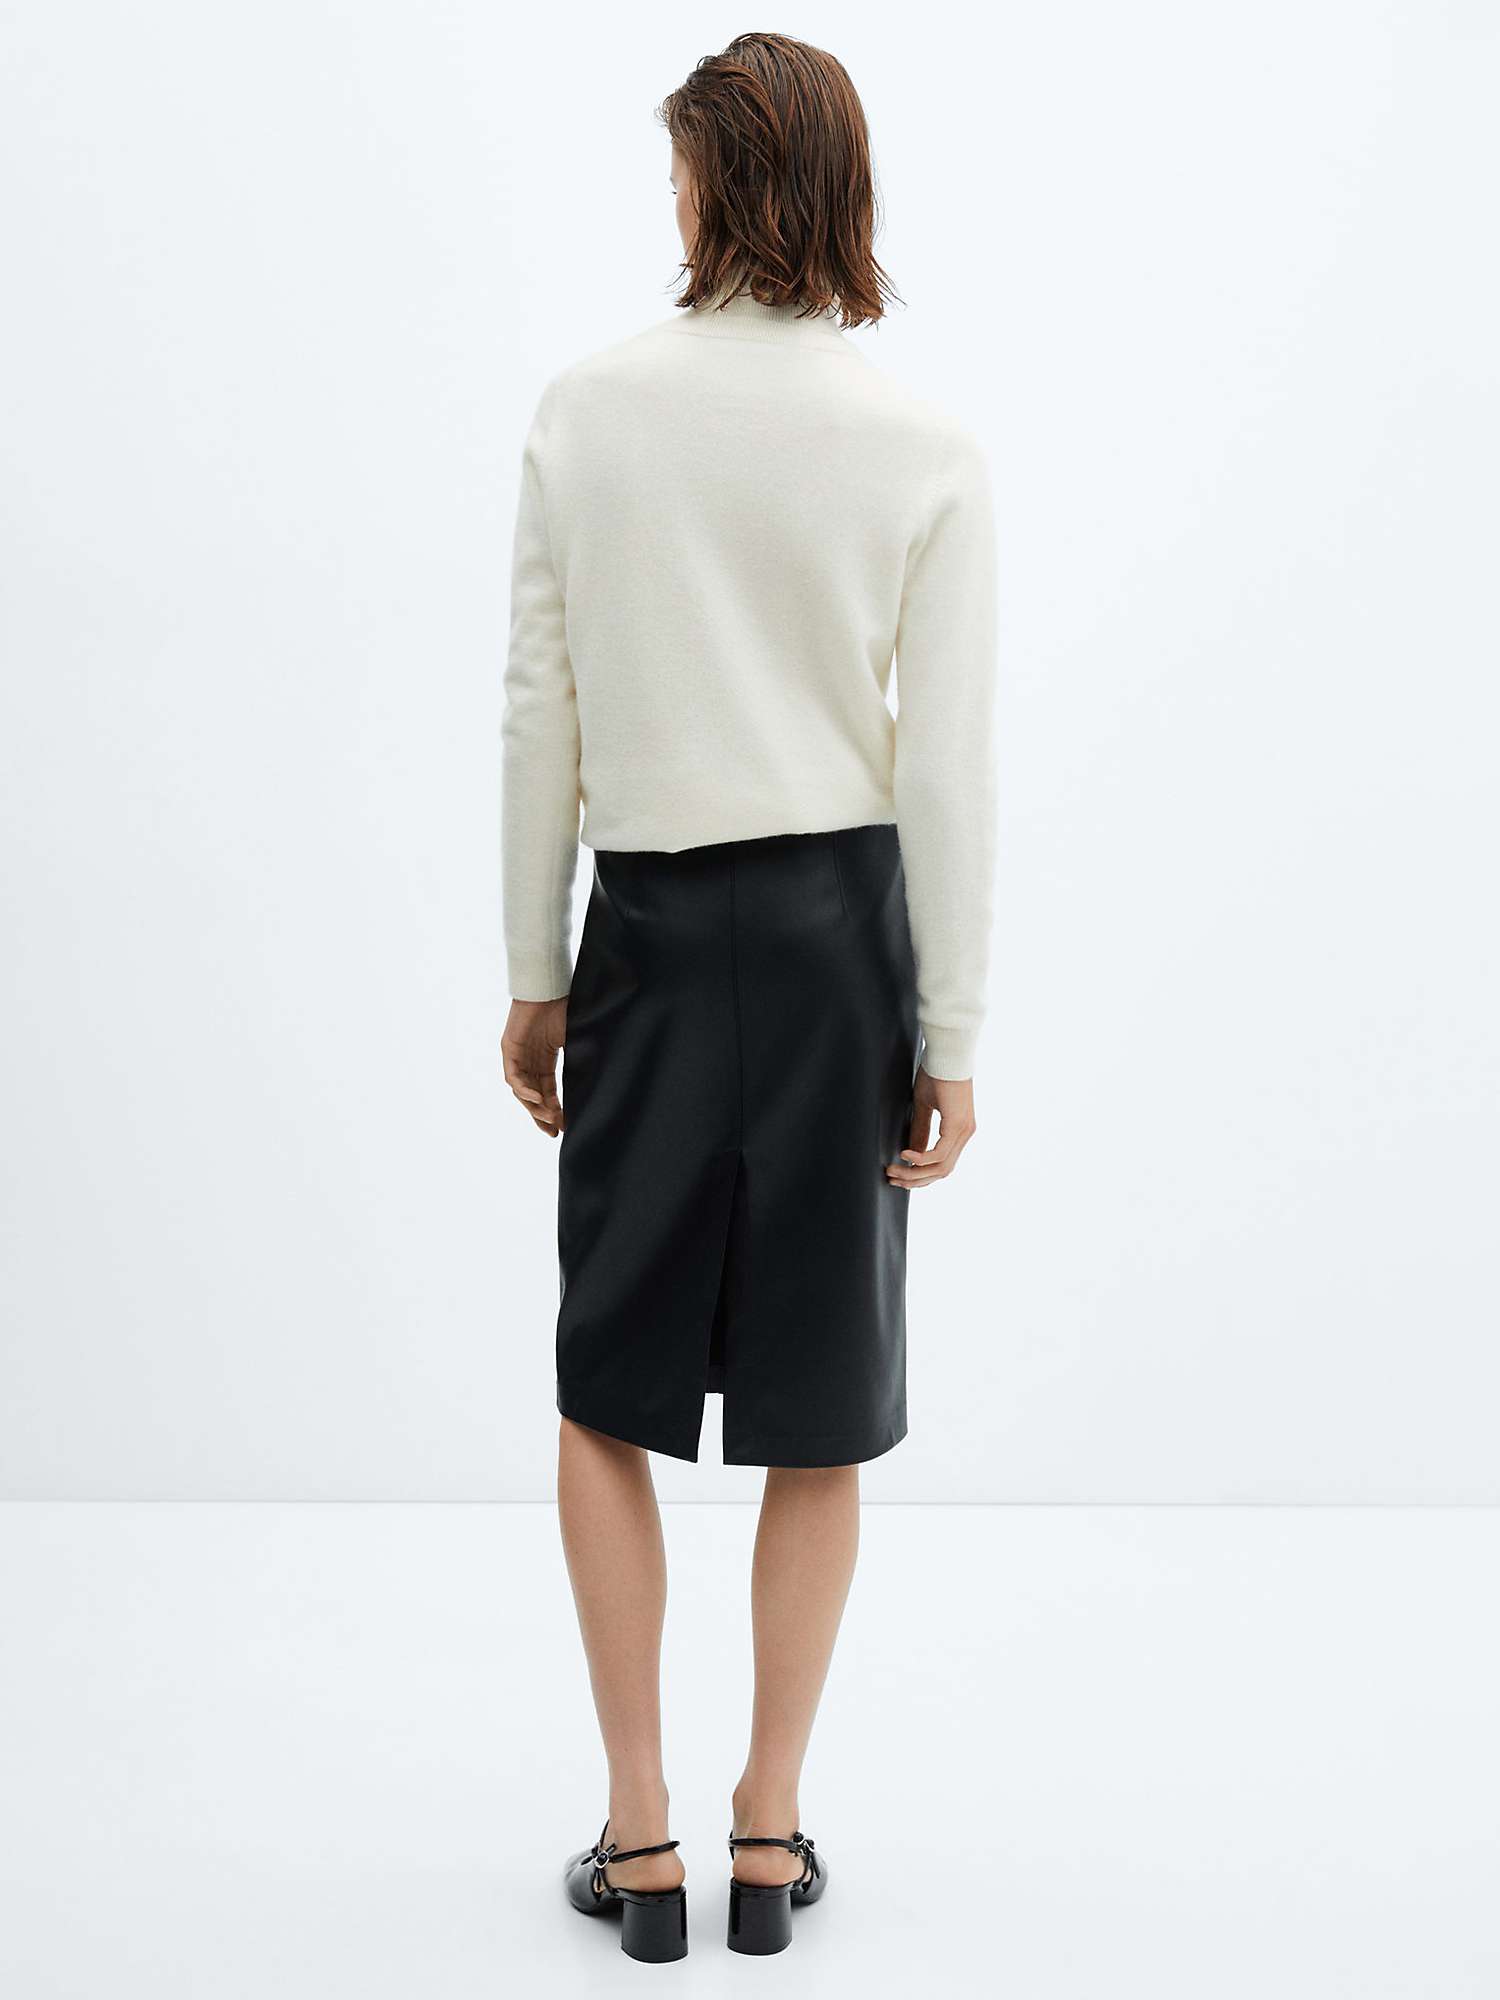 Buy Mango Faux Leather Pencil Skirt Online at johnlewis.com